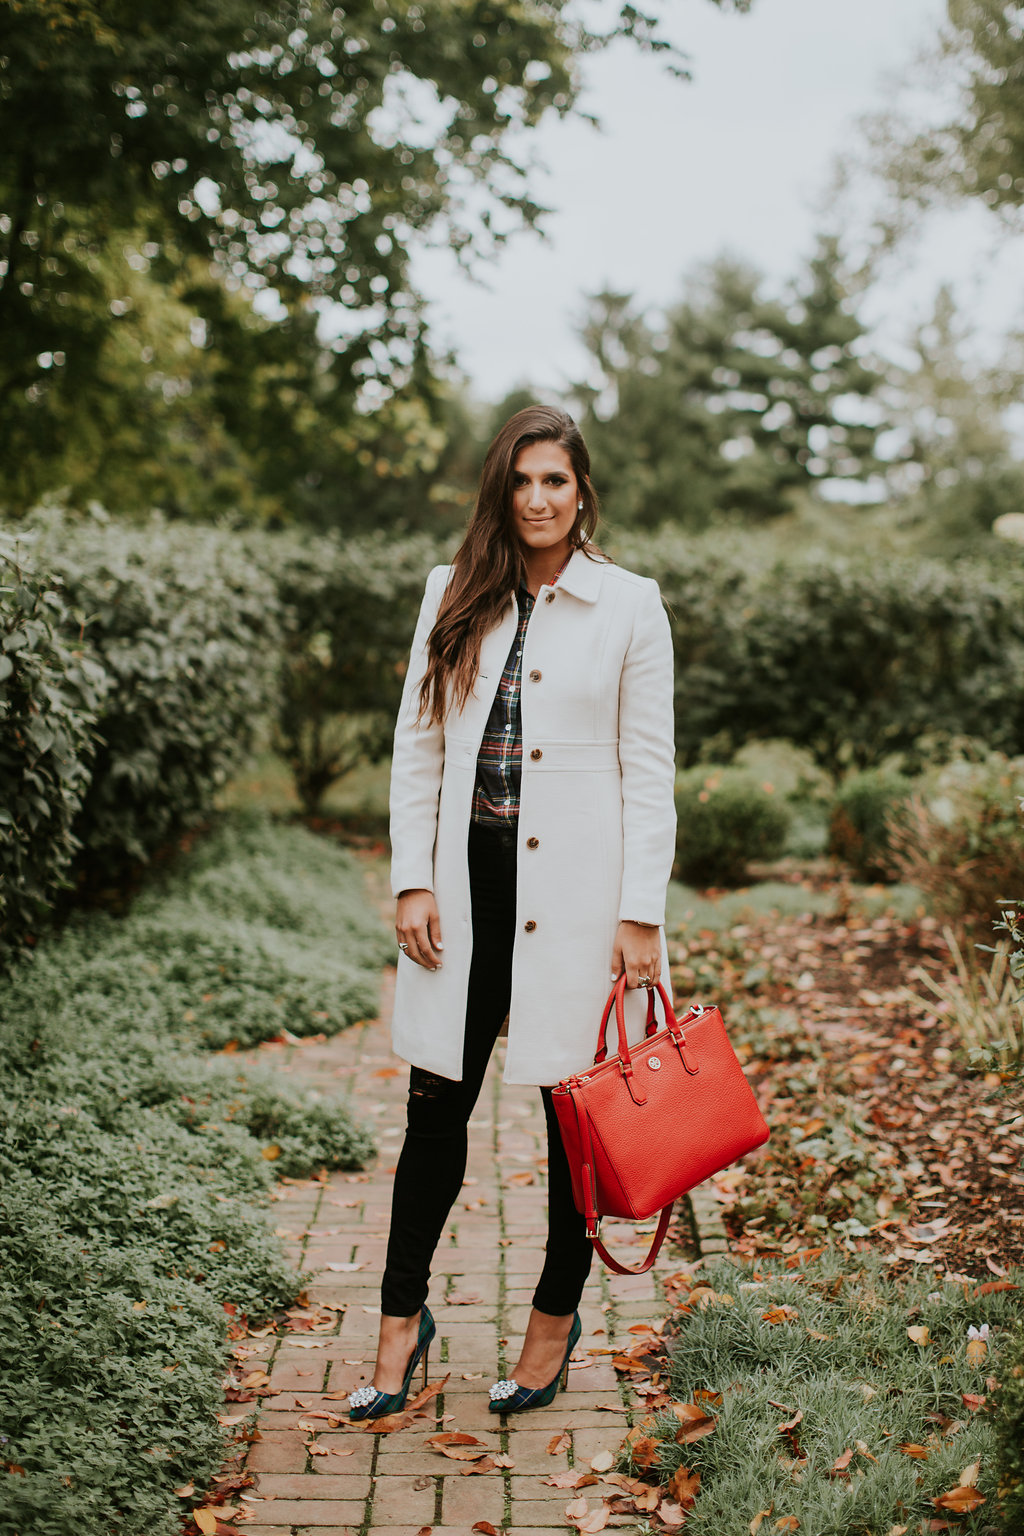 Double Cloth Lady Day Coat, j.crew coat, j.crew thinsulate coat, tartan plaid shirt, tartan plaid heels, plaid pumps, red tory burch tote, winter style, holiday outfit, holiday fashion // grace wainwright a southern drawl